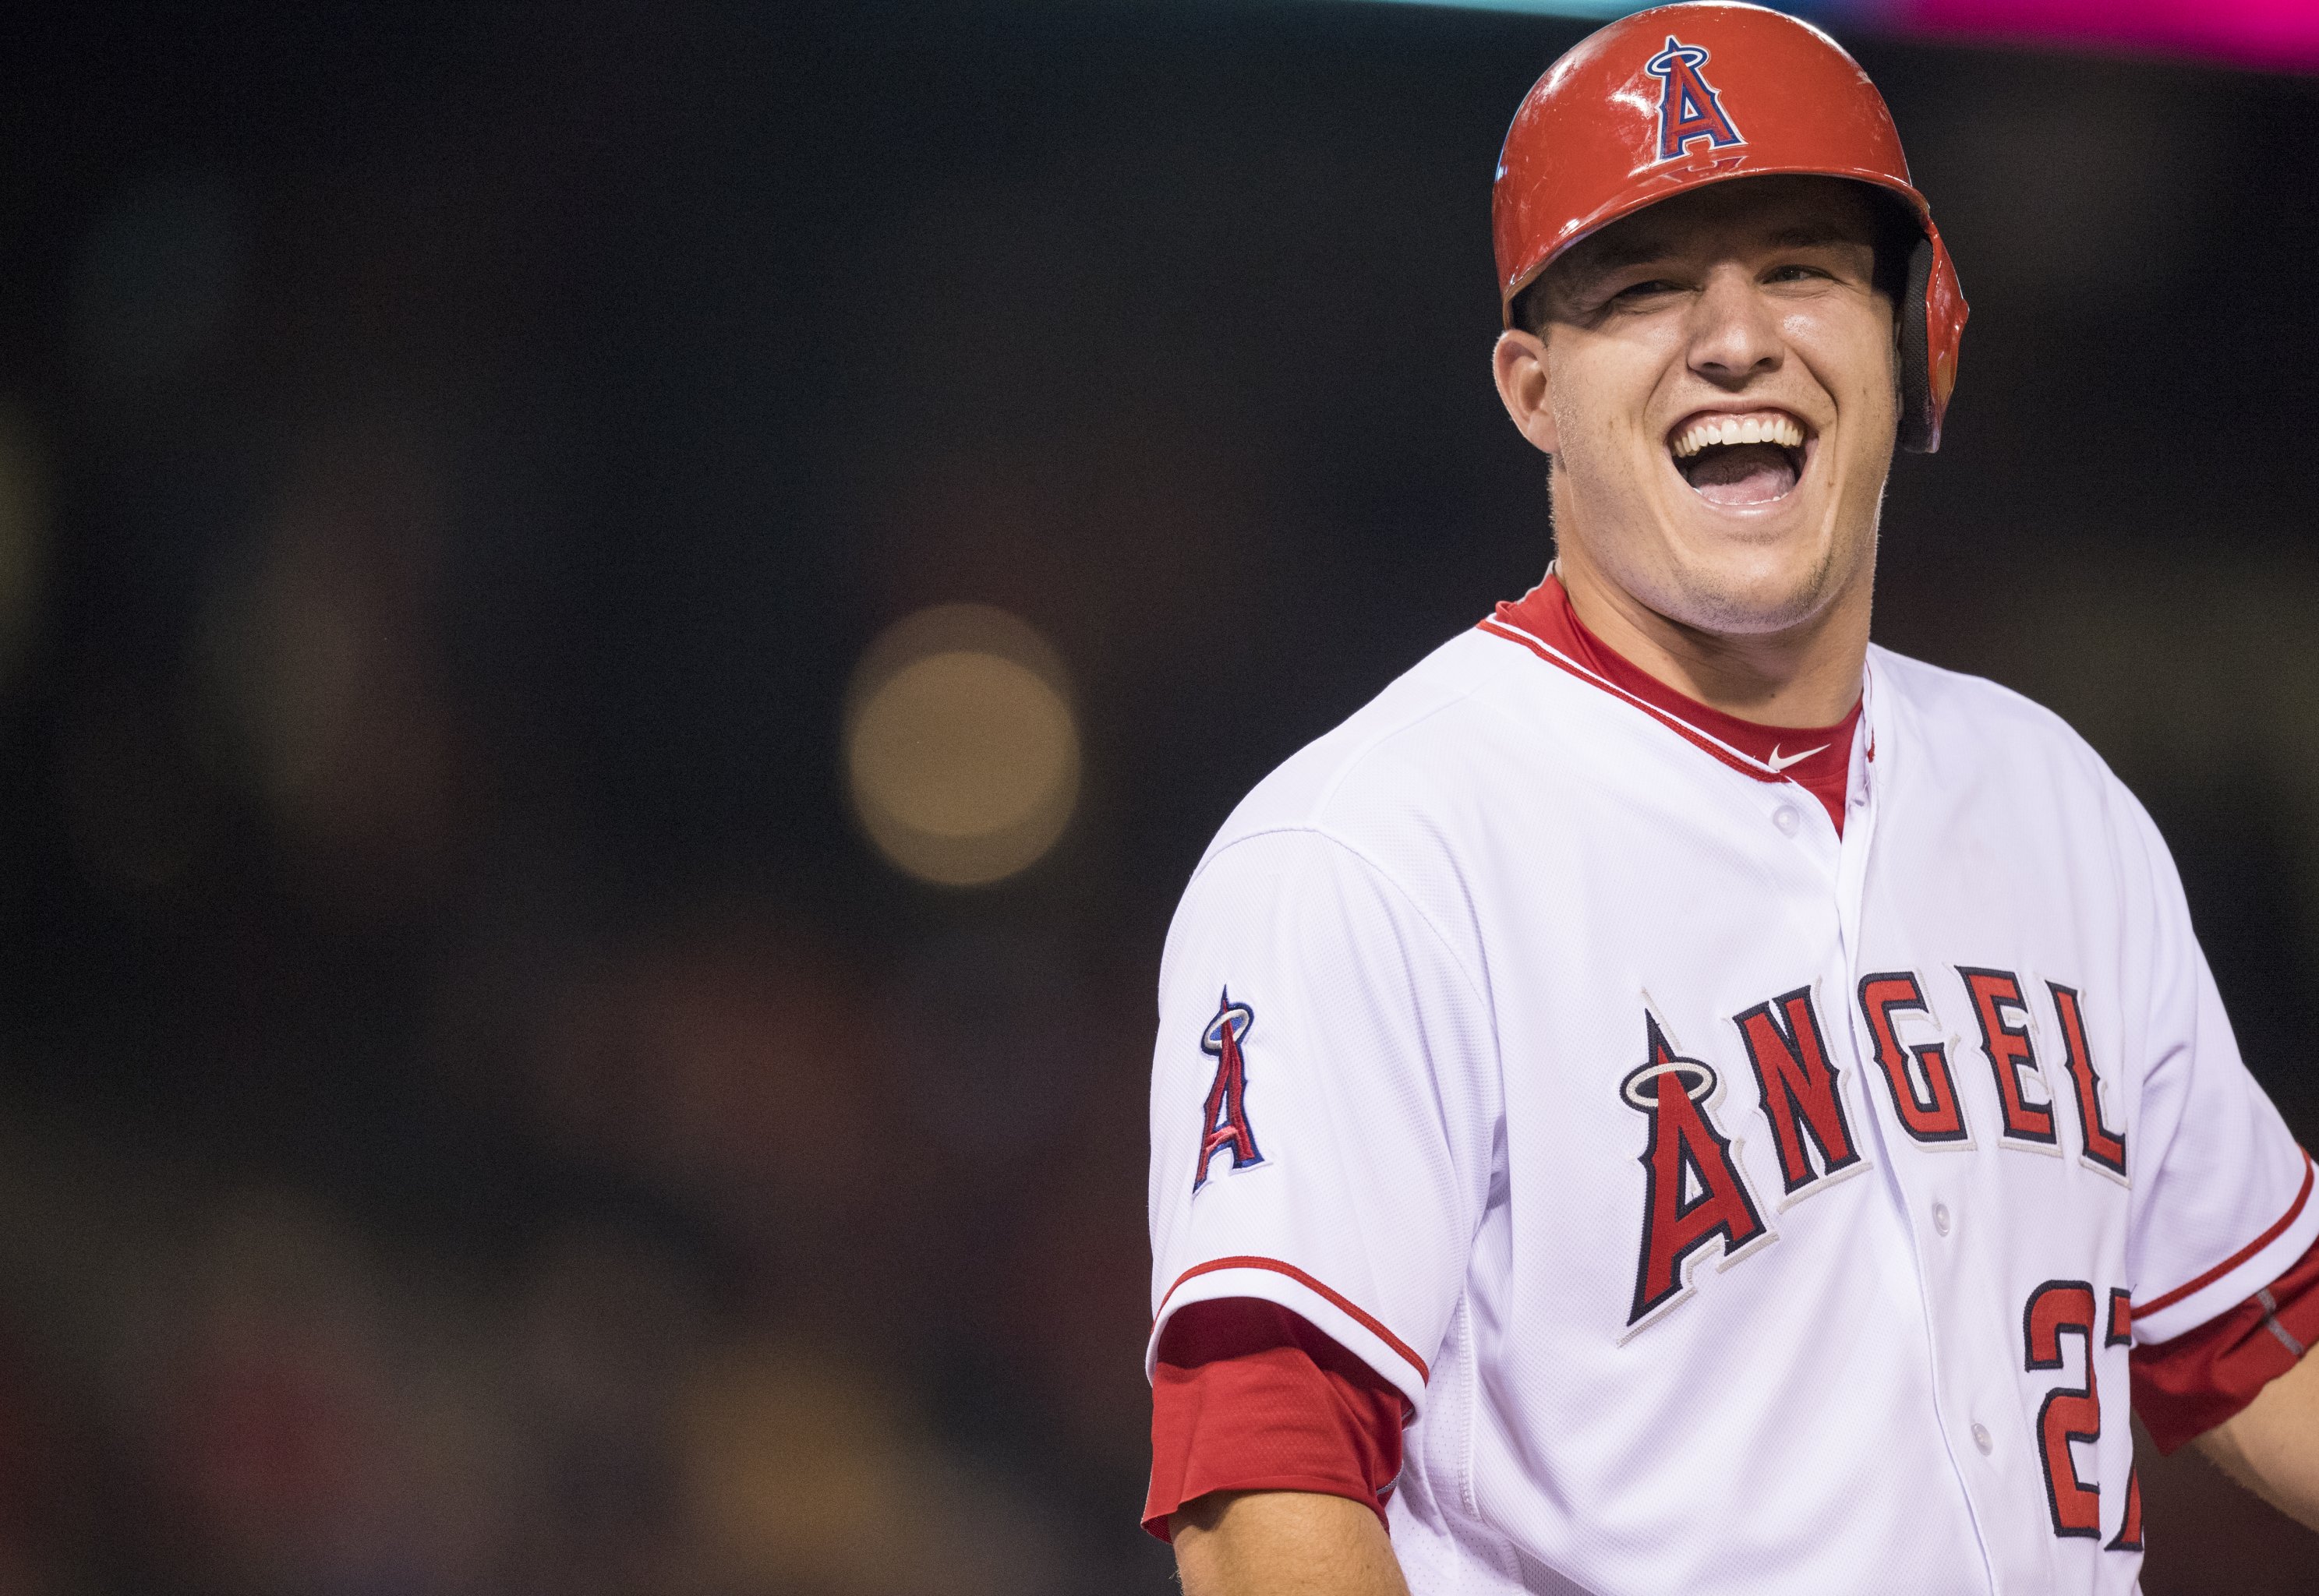 You Could Look It Up: From Babe Ruth to Mike Trout in 10 Stories - Baseball  ProspectusBaseball Prospectus